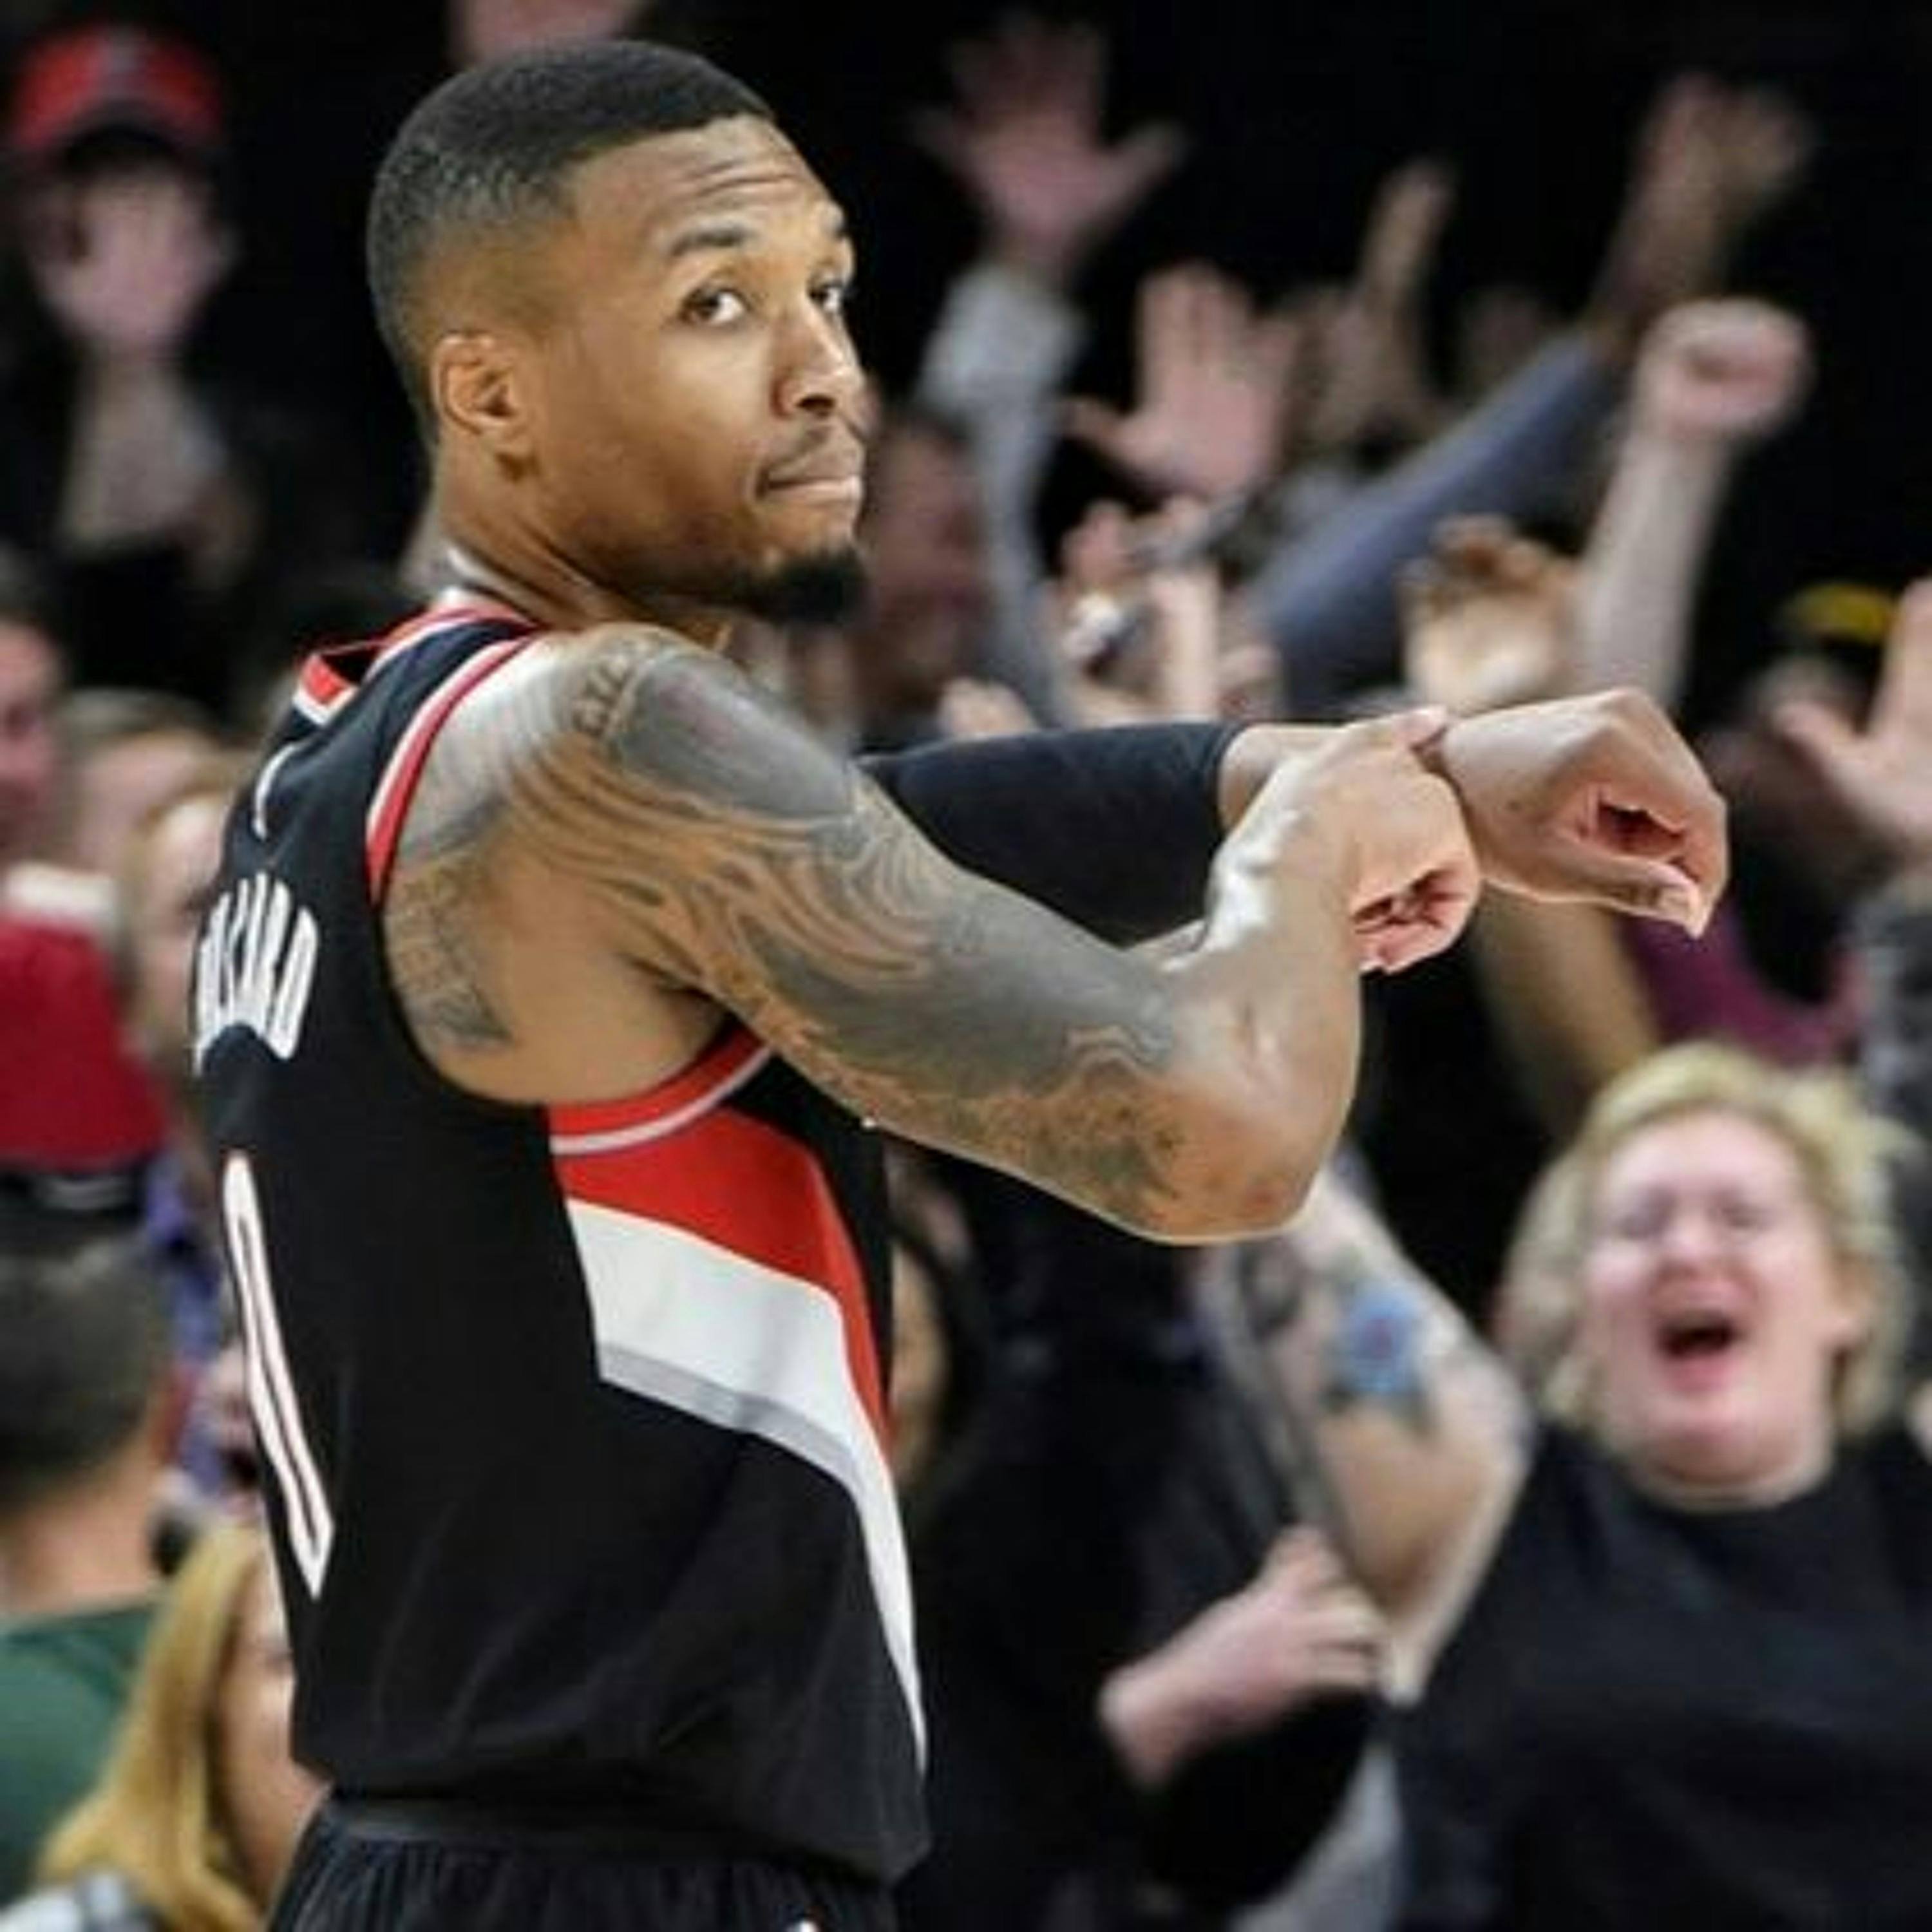 3-on-3 Blazers: The Blazers are championship contenders [it's true]